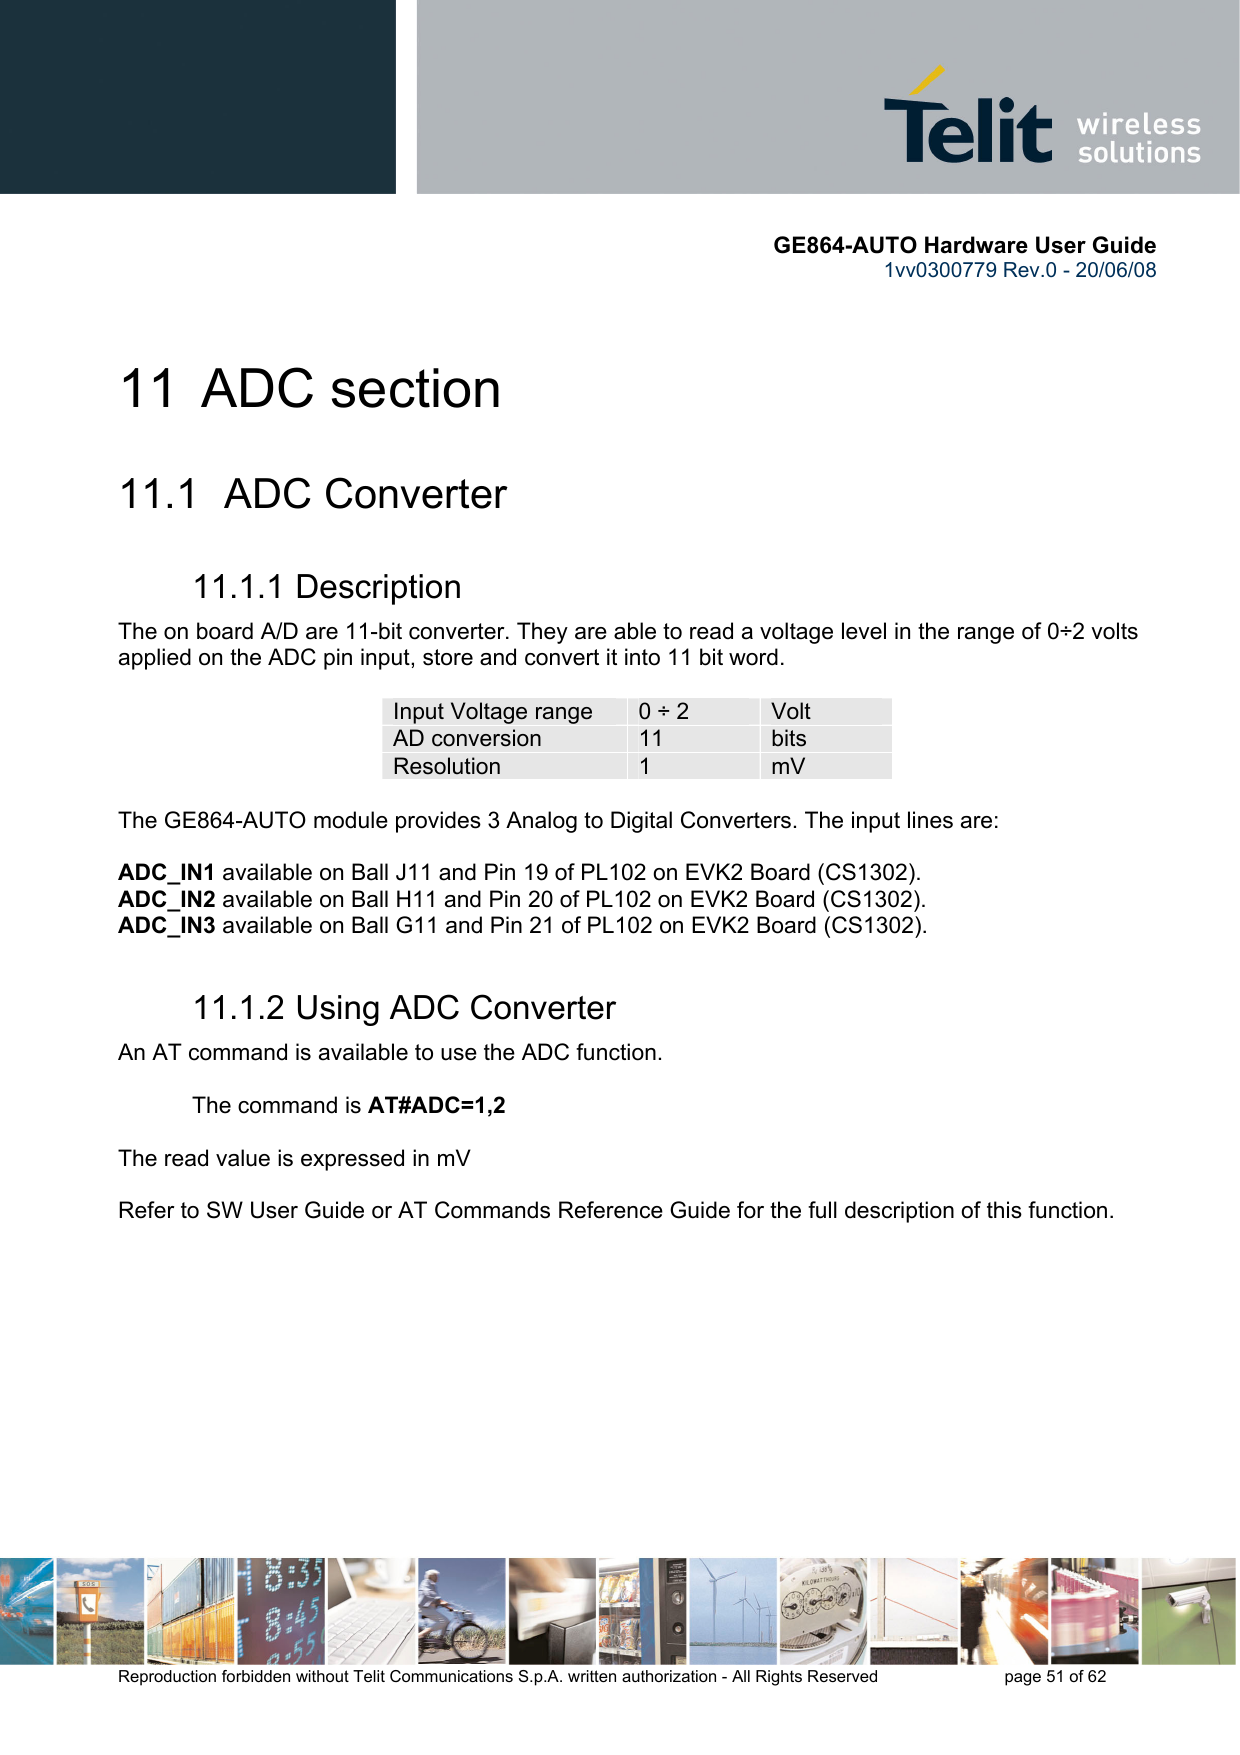       GE864-AUTO Hardware User Guide 1vv0300779 Rev.0 - 20/06/08      Reproduction forbidden without Telit Communications S.p.A. written authorization - All Rights Reserved    page 51 of 62  11 ADC section 11.1   ADC Converter 11.1.1 Description The on board A/D are 11-bit converter. They are able to read a voltage level in the range of 0÷2 volts applied on the ADC pin input, store and convert it into 11 bit word.   Input Voltage range  0 ÷ 2  Volt AD conversion  11  bits Resolution  1  mV  The GE864-AUTO module provides 3 Analog to Digital Converters. The input lines are:  ADC_IN1 available on Ball J11 and Pin 19 of PL102 on EVK2 Board (CS1302). ADC_IN2 available on Ball H11 and Pin 20 of PL102 on EVK2 Board (CS1302). ADC_IN3 available on Ball G11 and Pin 21 of PL102 on EVK2 Board (CS1302). 11.1.2 Using ADC Converter An AT command is available to use the ADC function.  The command is AT#ADC=1,2  The read value is expressed in mV  Refer to SW User Guide or AT Commands Reference Guide for the full description of this function.  